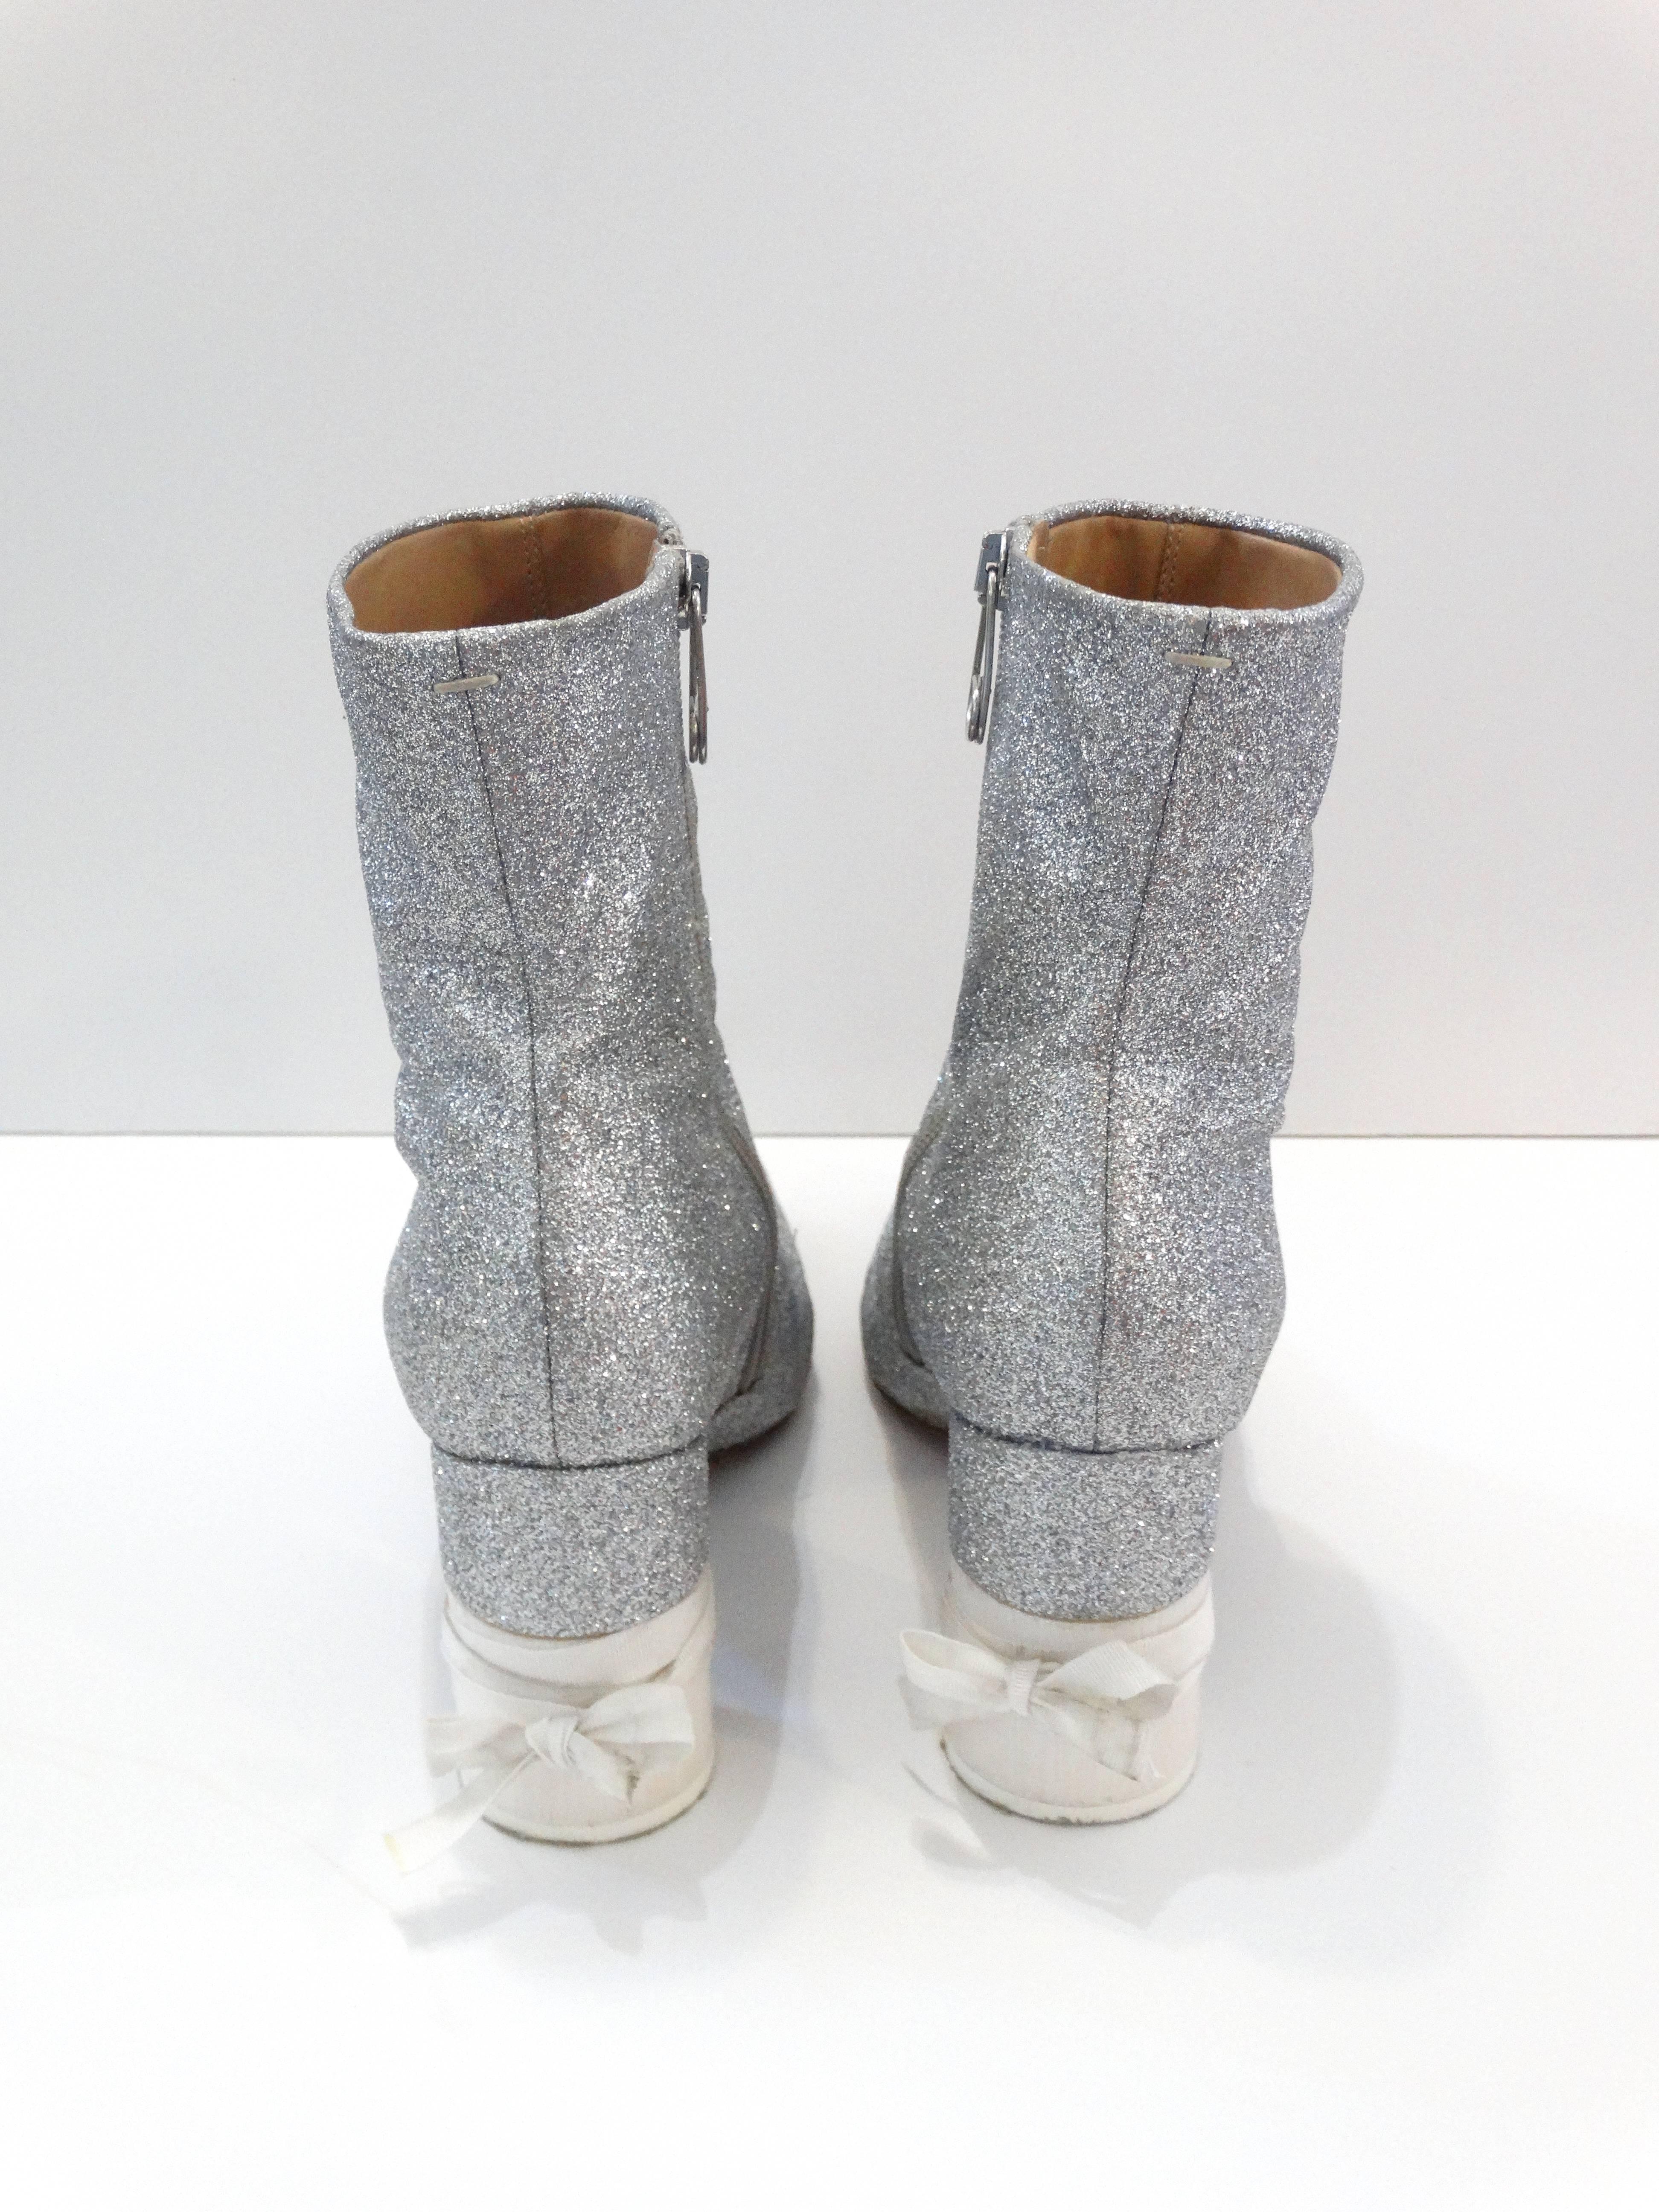 Coveted Maison Martin Margiela Silver Glitter Heeled Boots In Excellent Condition In Scottsdale, AZ